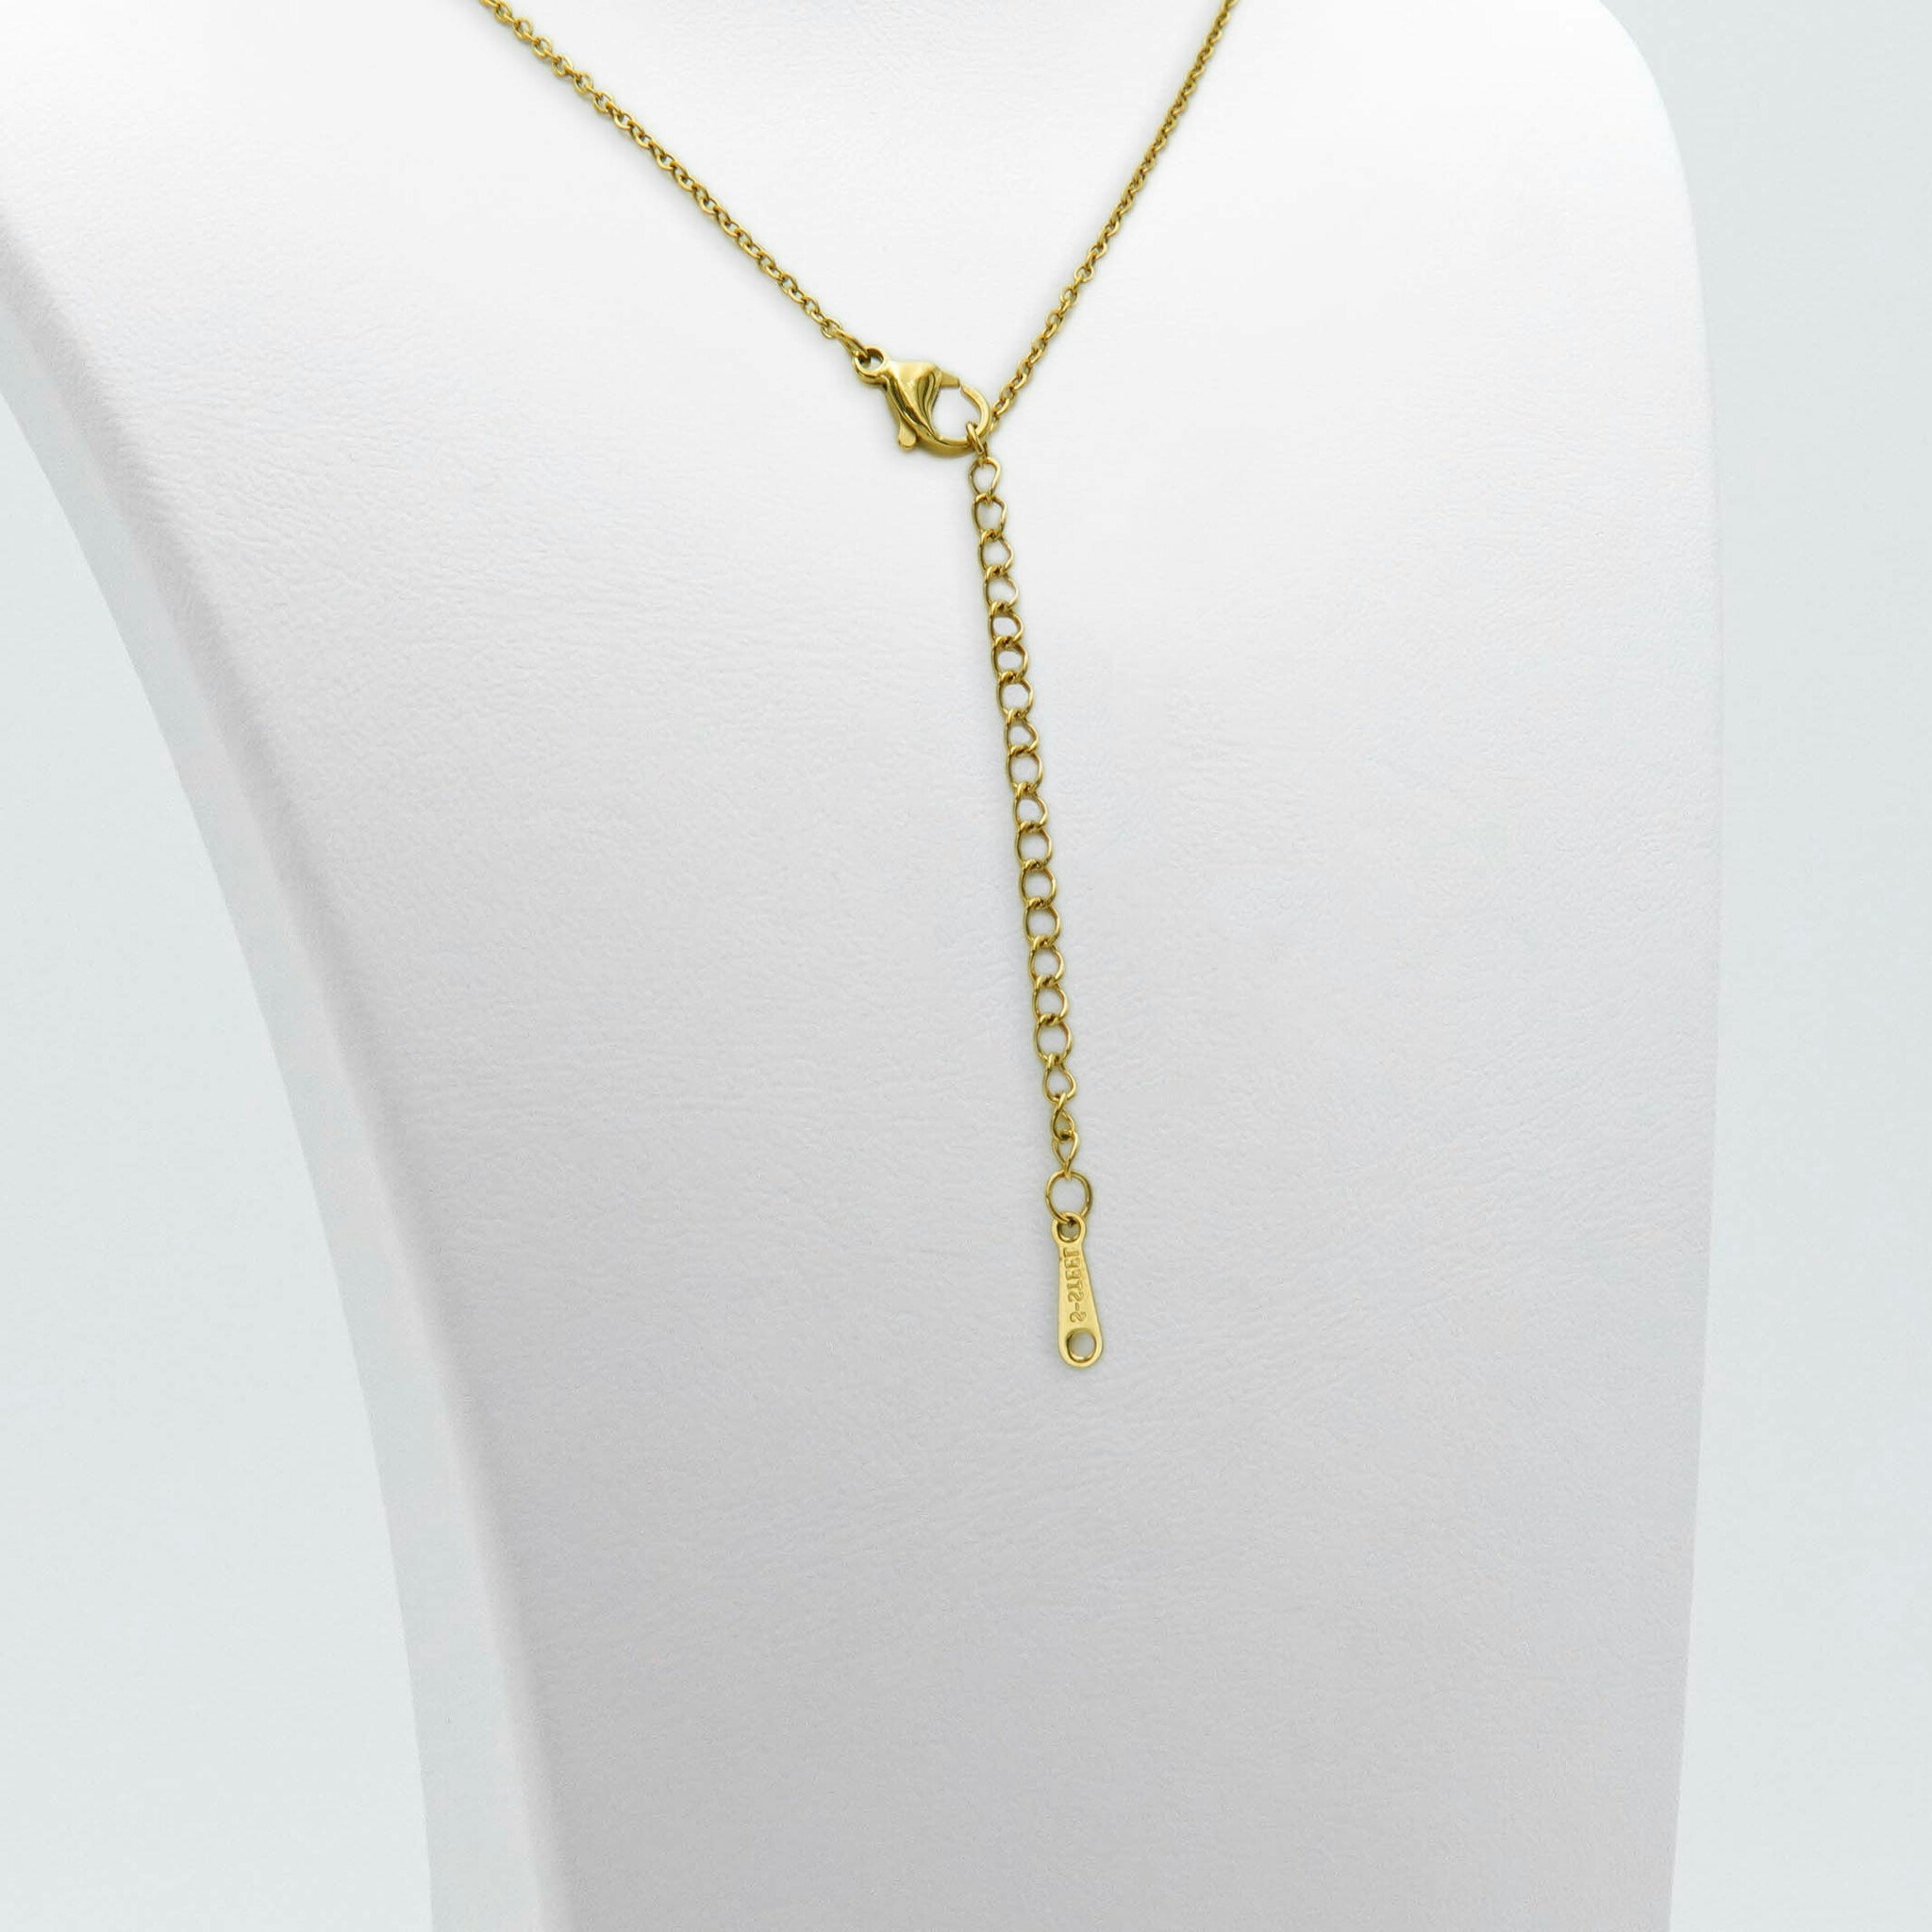 Falling In Diamonds - Gold Edition Ladies Necklace - SWEVALI